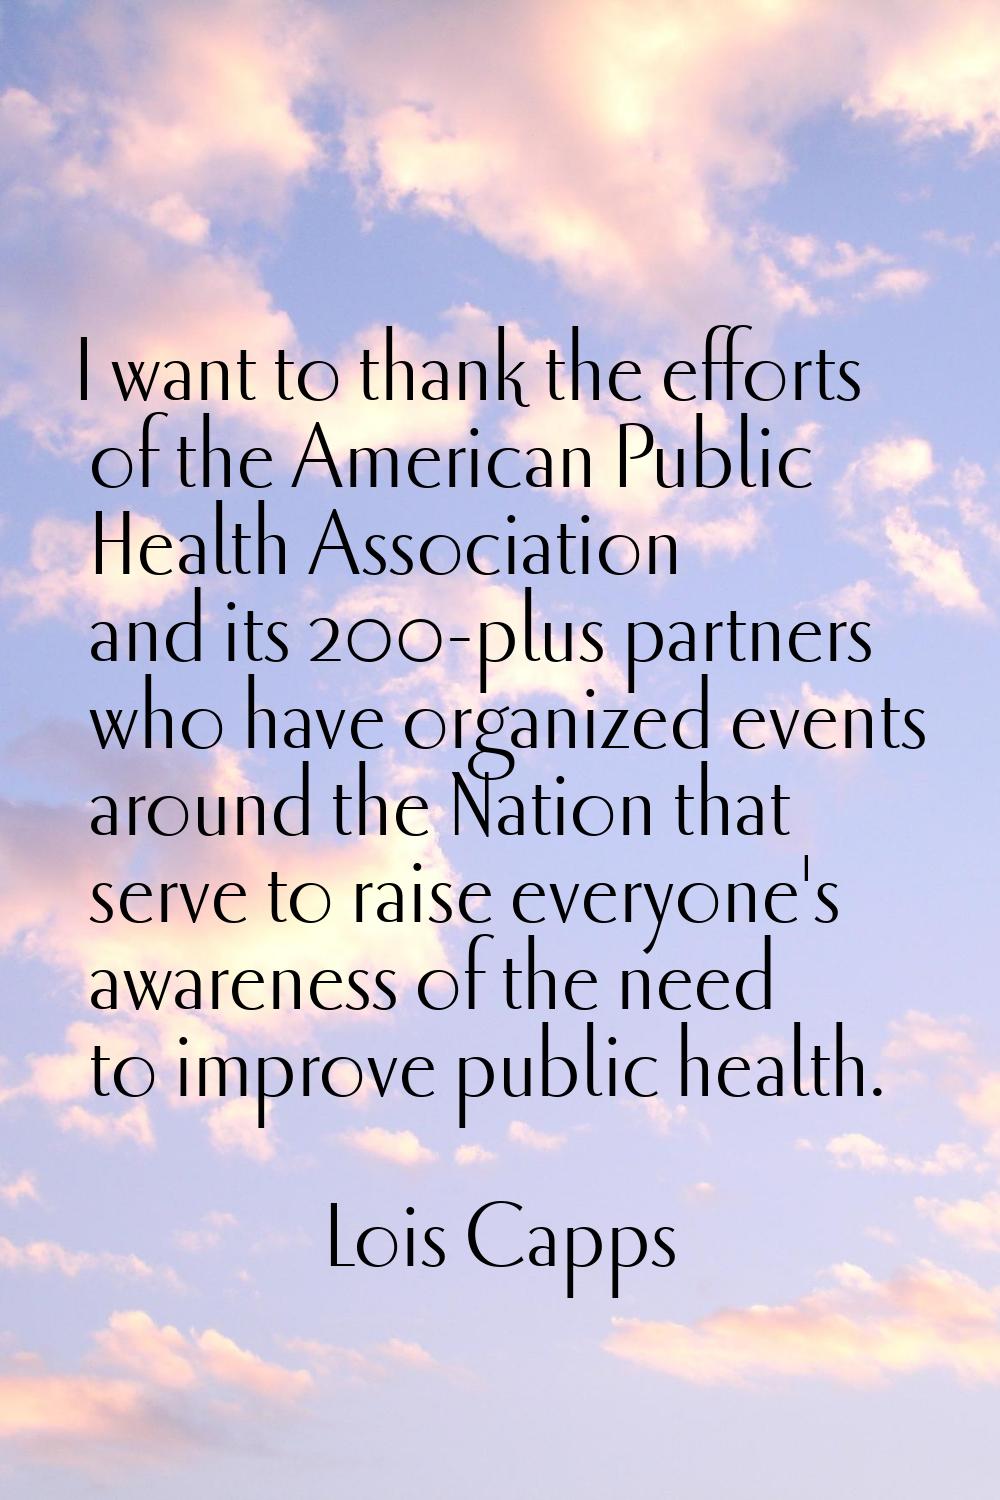 I want to thank the efforts of the American Public Health Association and its 200-plus partners who